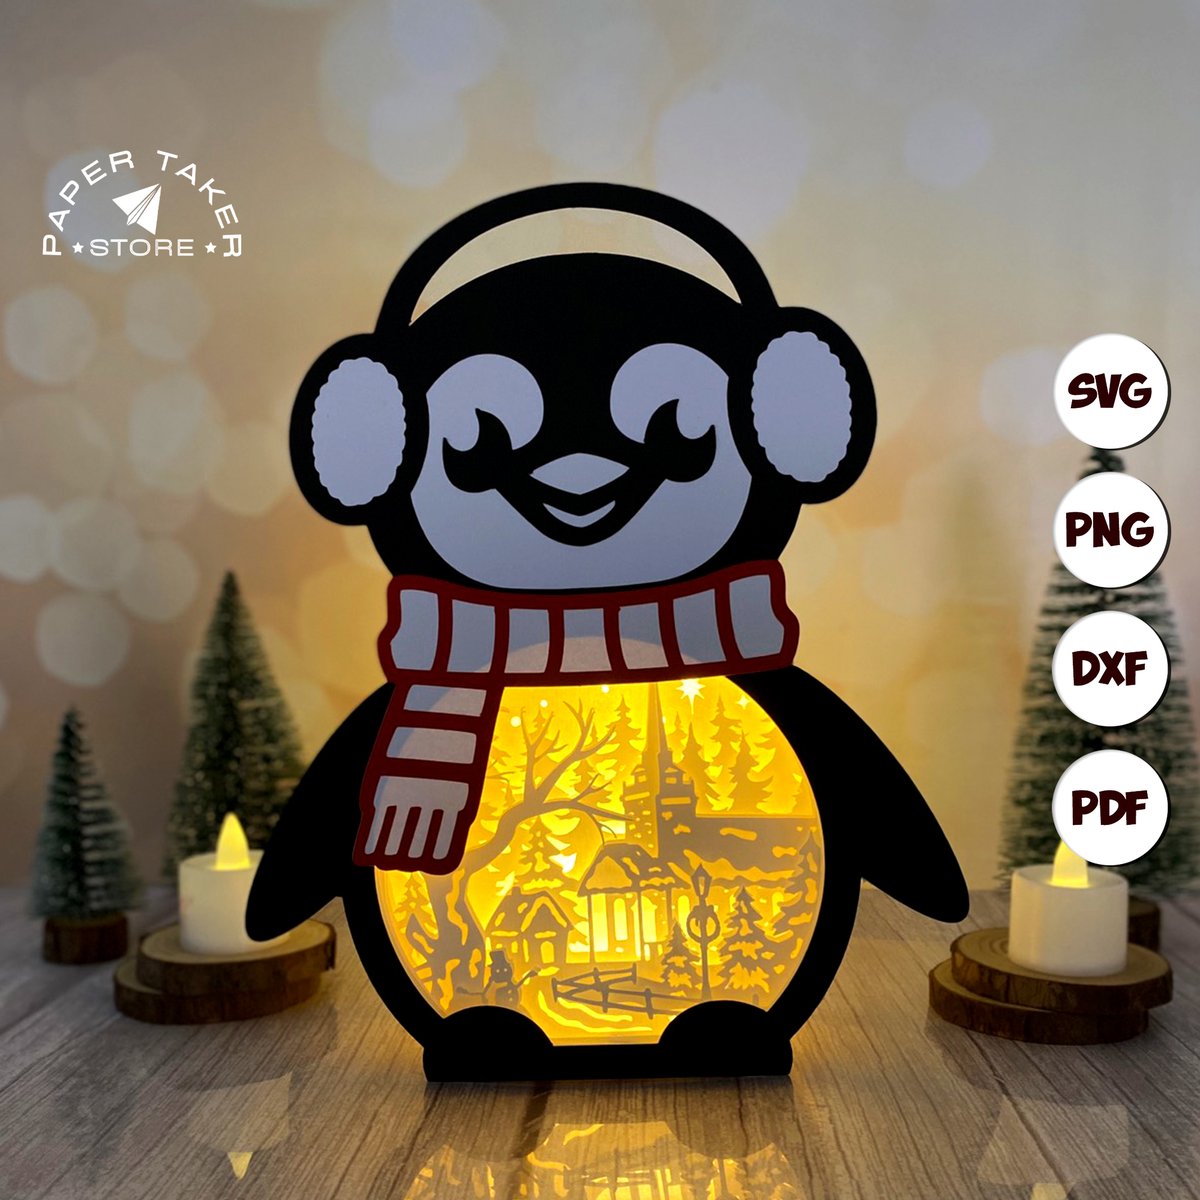 Excited to share the latest addition to my #etsy shop: Christmas Snowman Penguin Box SVG for Cricut Projects, 3D Papercut Light Box Sliceform, DIY Penguin Box Night Light etsy.me/3QxRetd #christmas #silhouettestudio #svgforcricut #papercutlightbox #lampdecoration #paperla